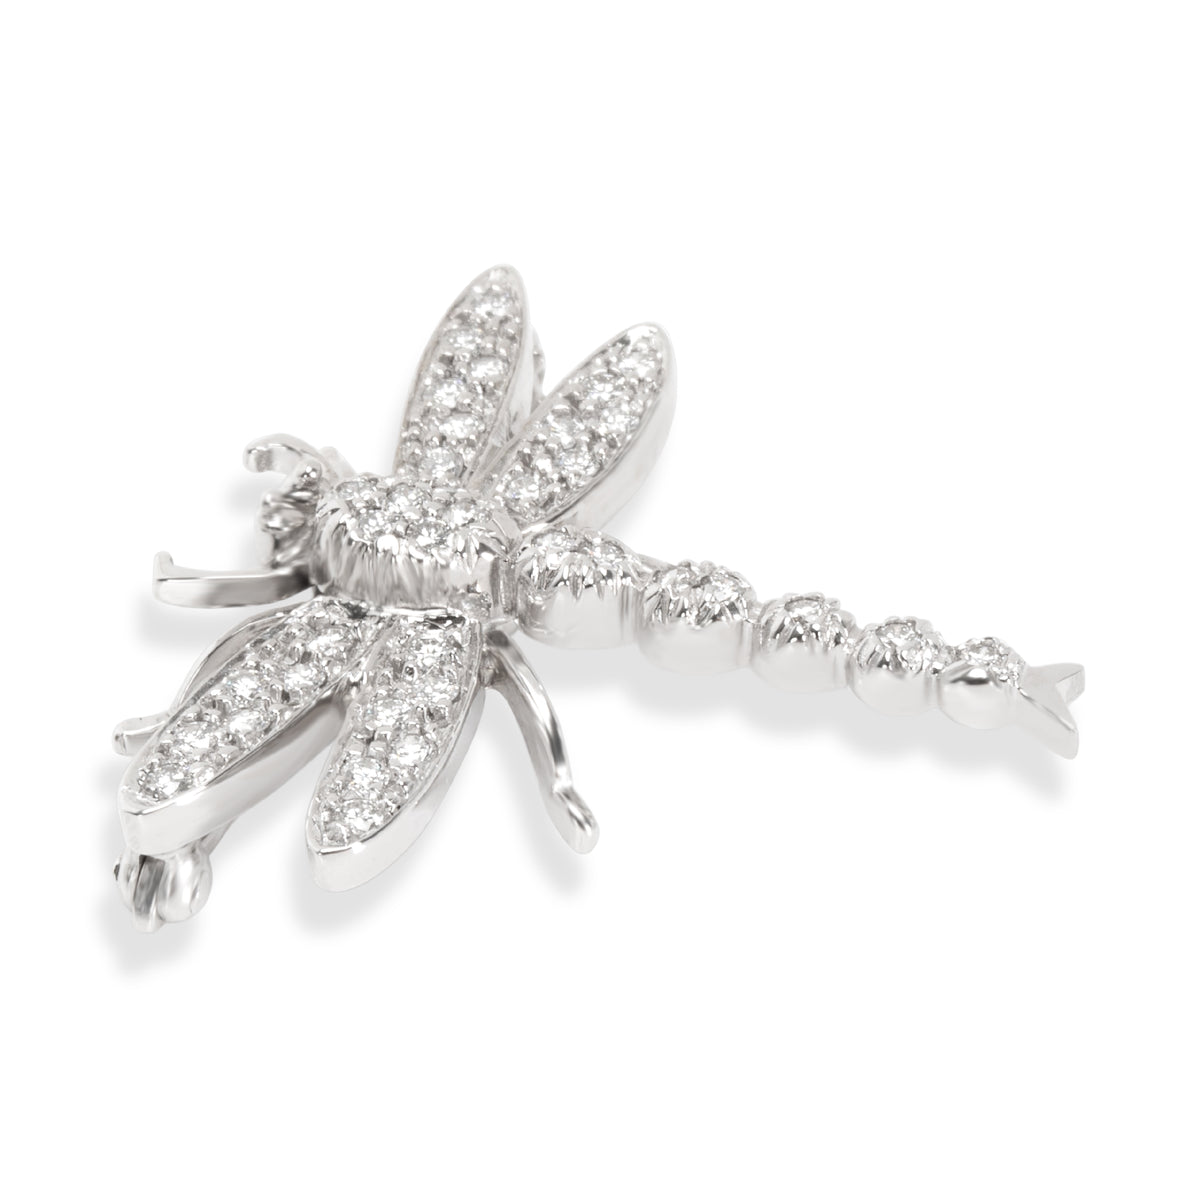 Diamond Dragonfly Brooch in 18K White Gold 0.40 CTW